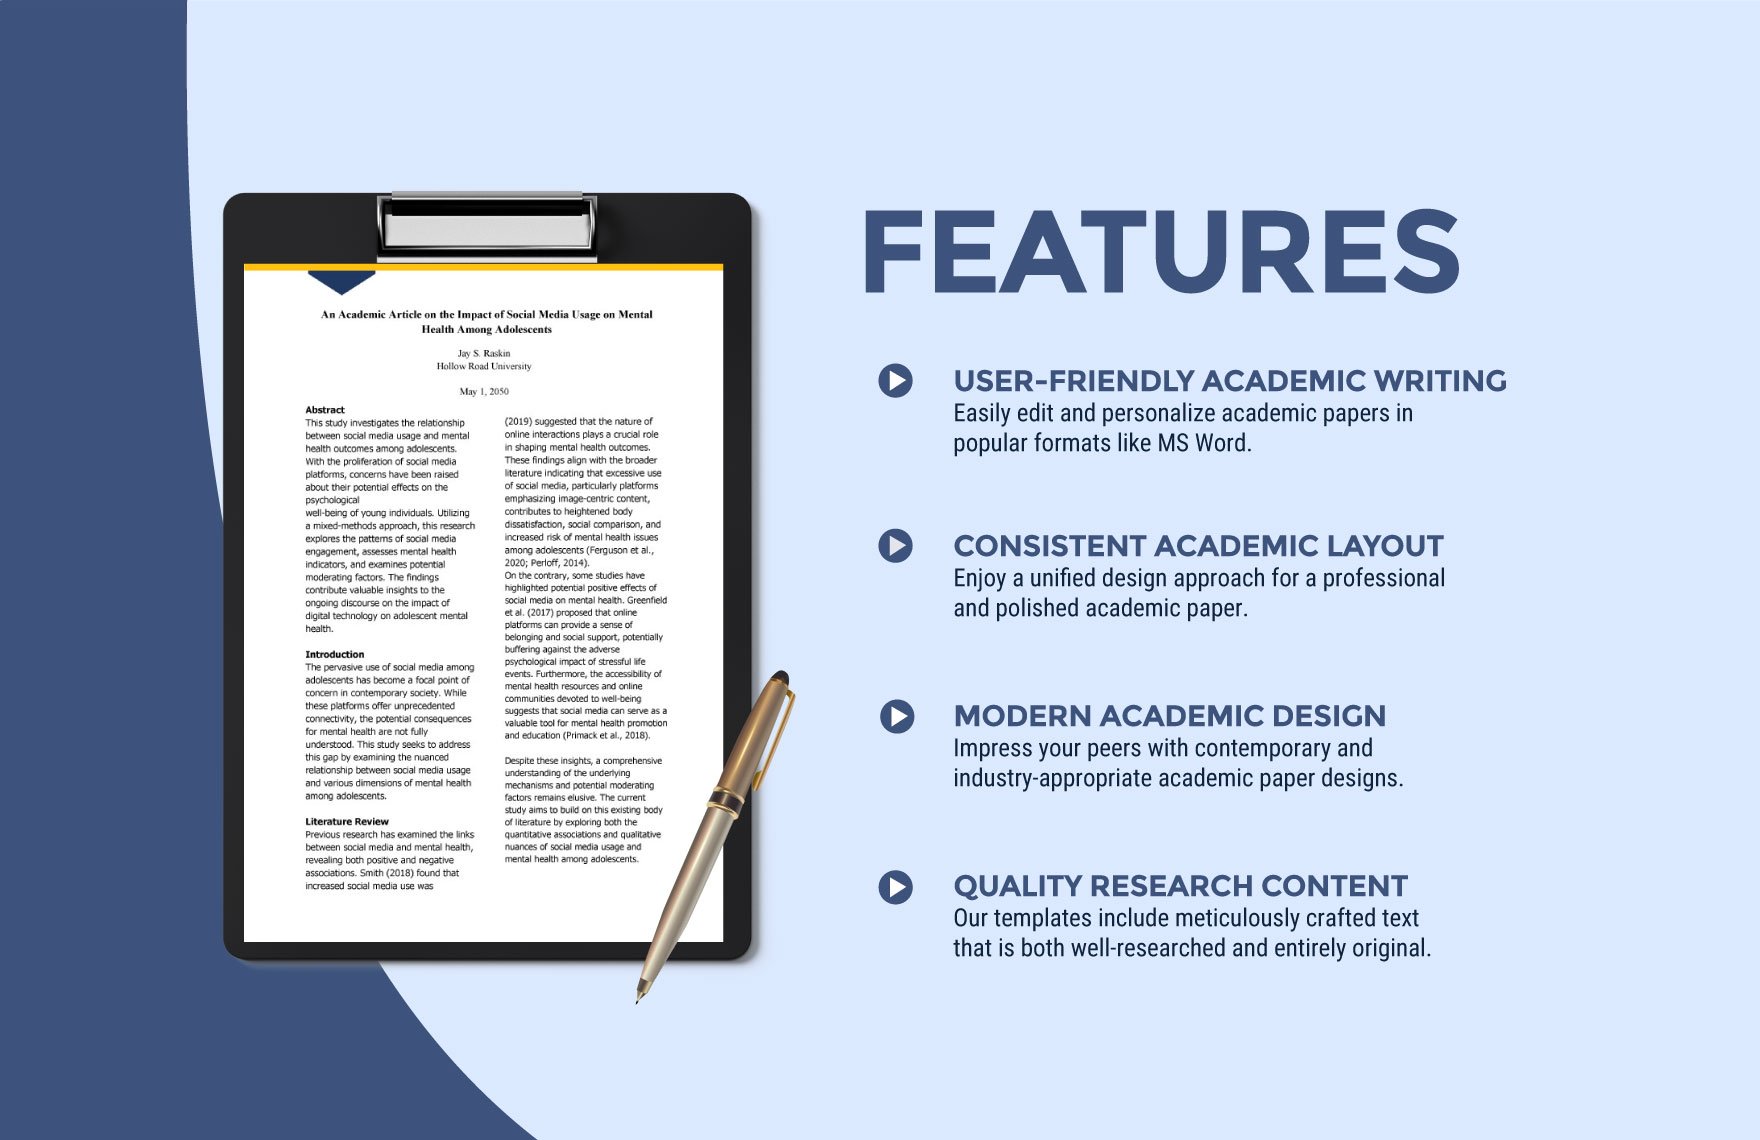 Academic Article Template